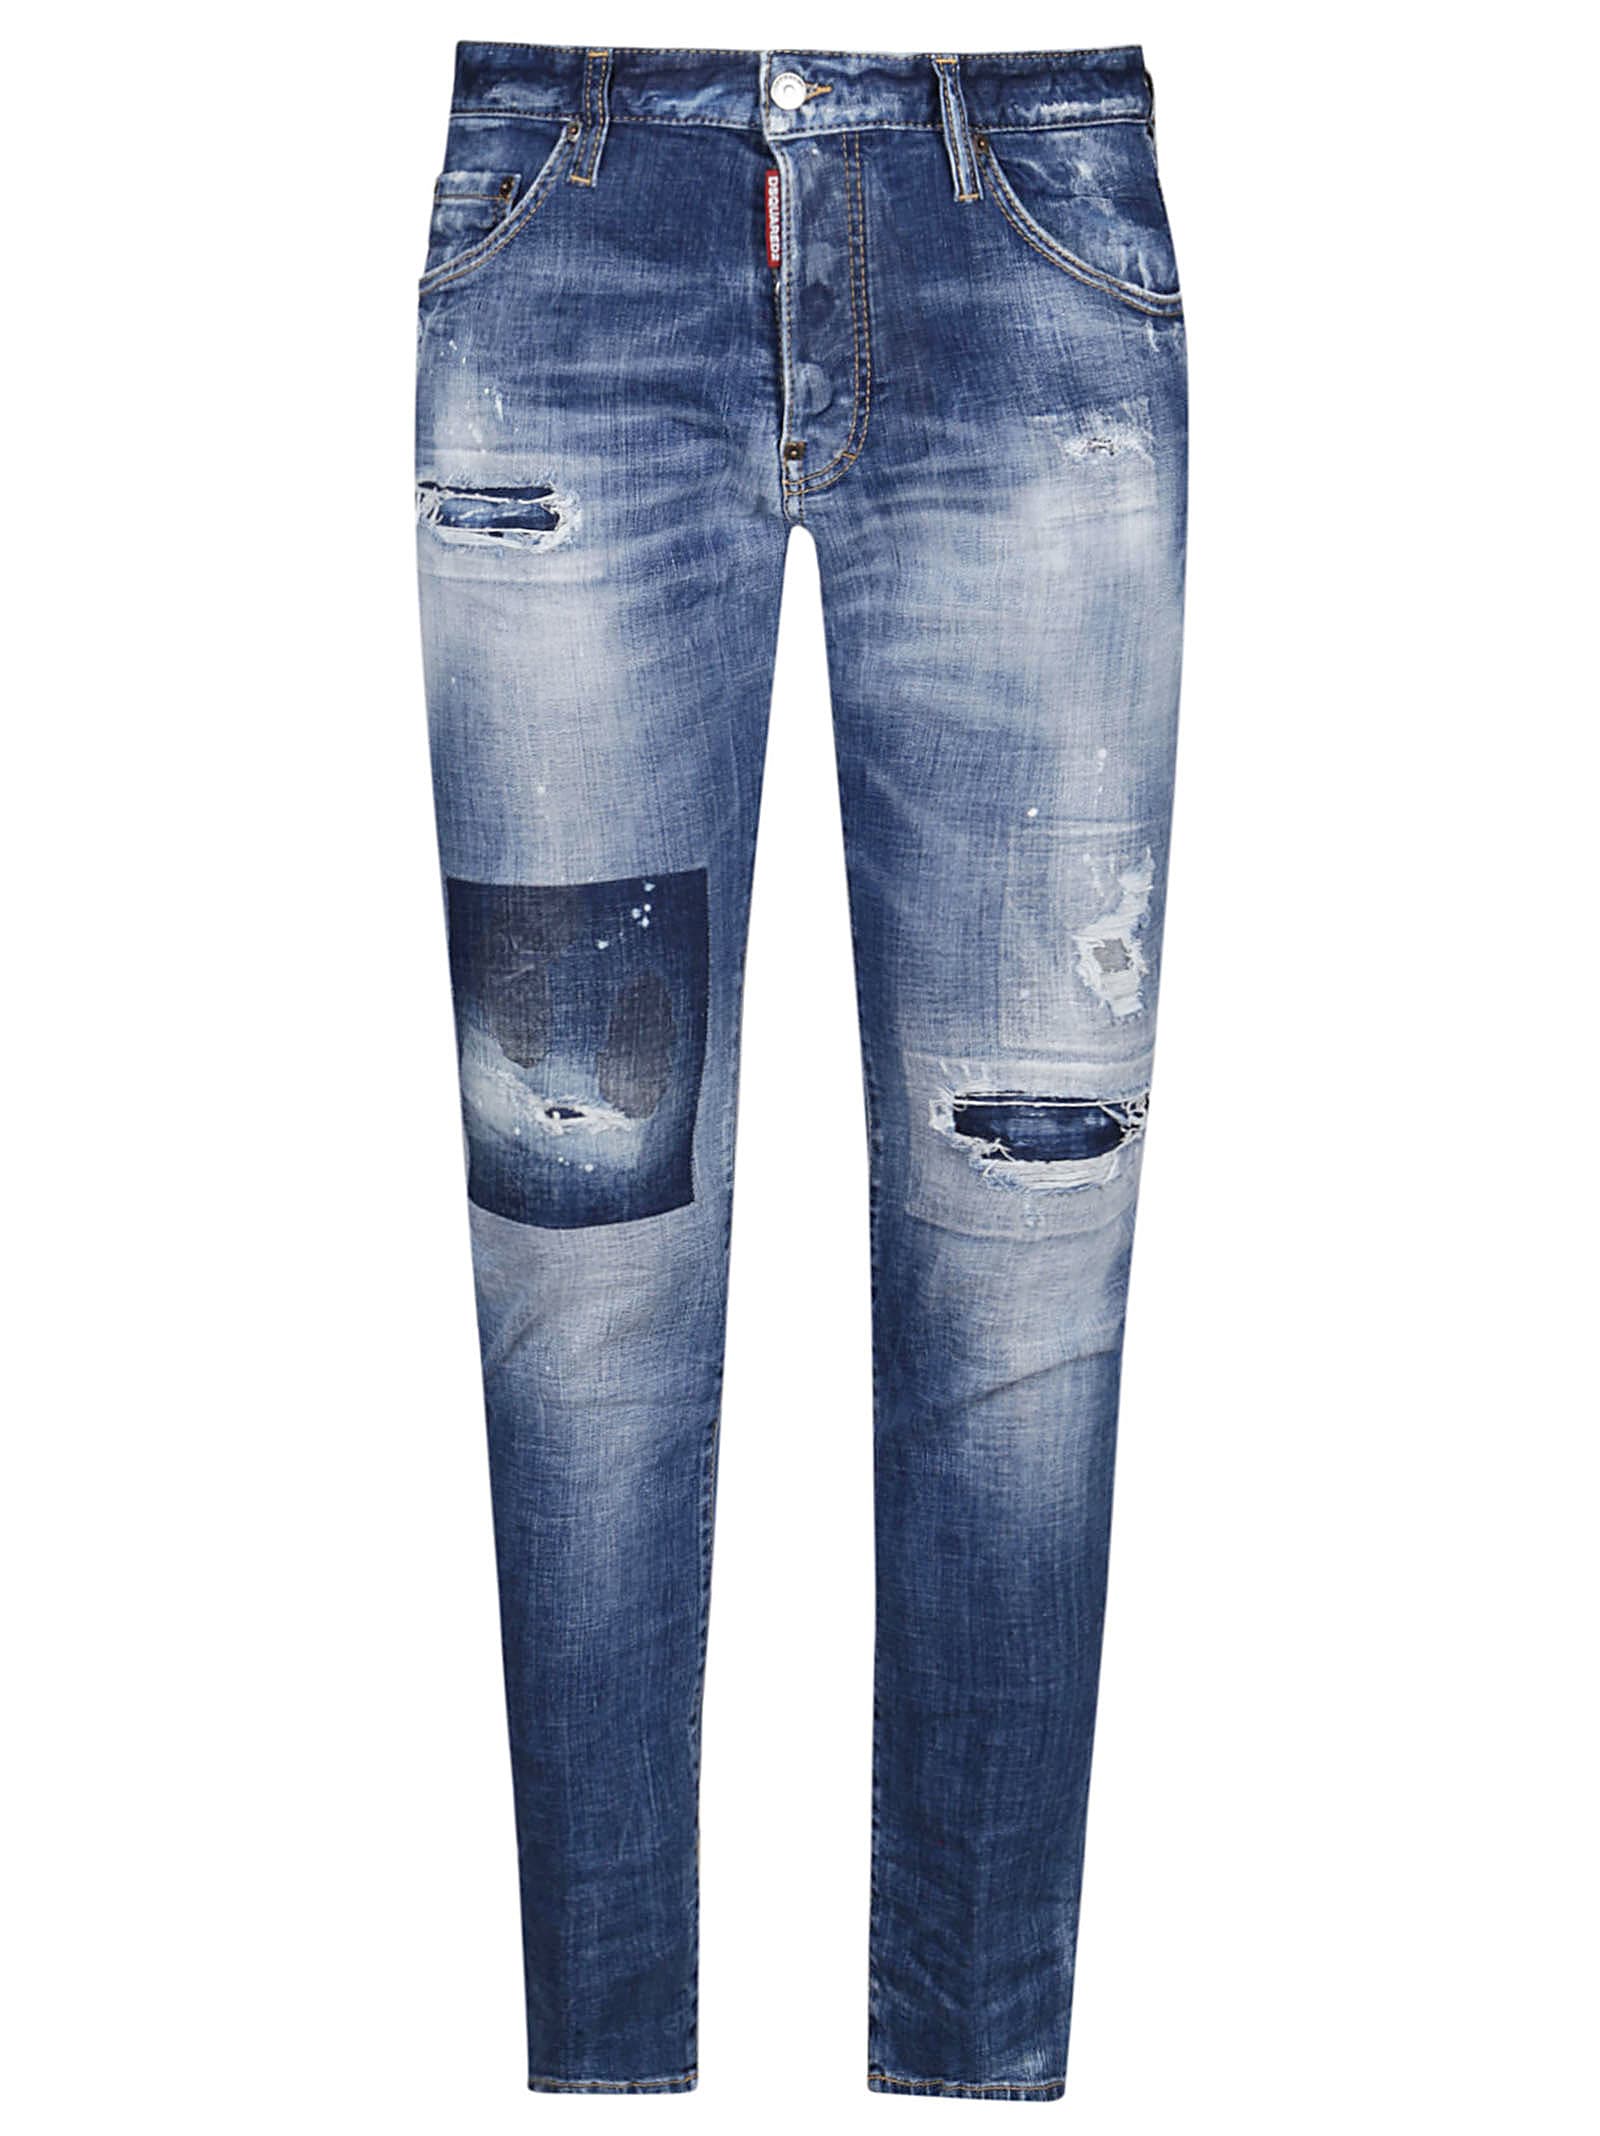 DSQUARED2 COOL GUY JEANS,S71LB0949 S30342 470 NAVY BLUE